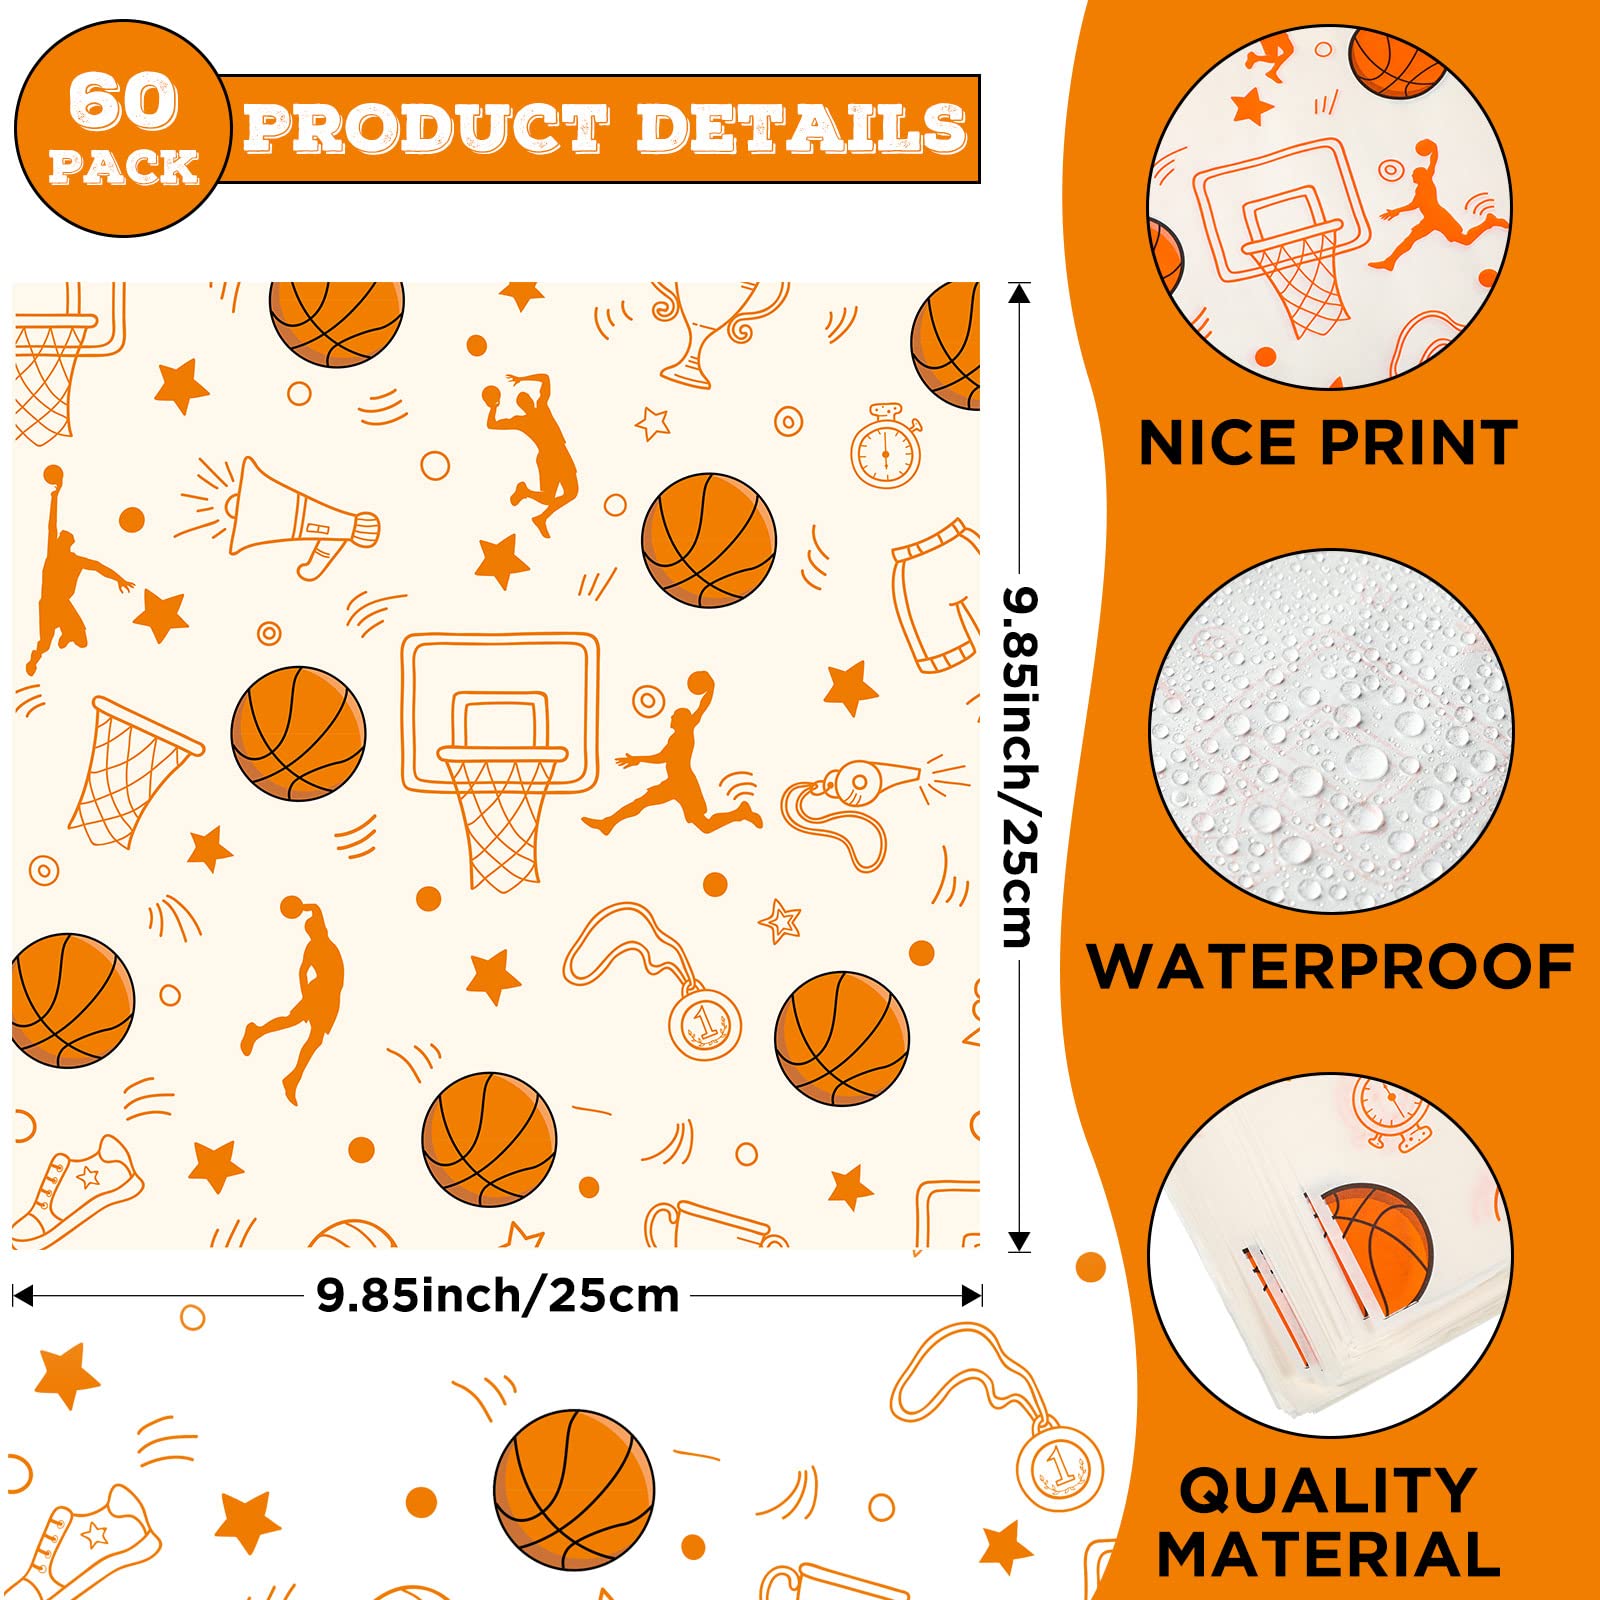 90 PCS Basketball Party Supplies 1.1lb 30 Basketball Paper Food Serving Tray Paper Food Holder Tray Disposable Paper Boat Paper Food Tray with 60 Deli Wrap Wax Paper Sheets for Basketball Party Favor